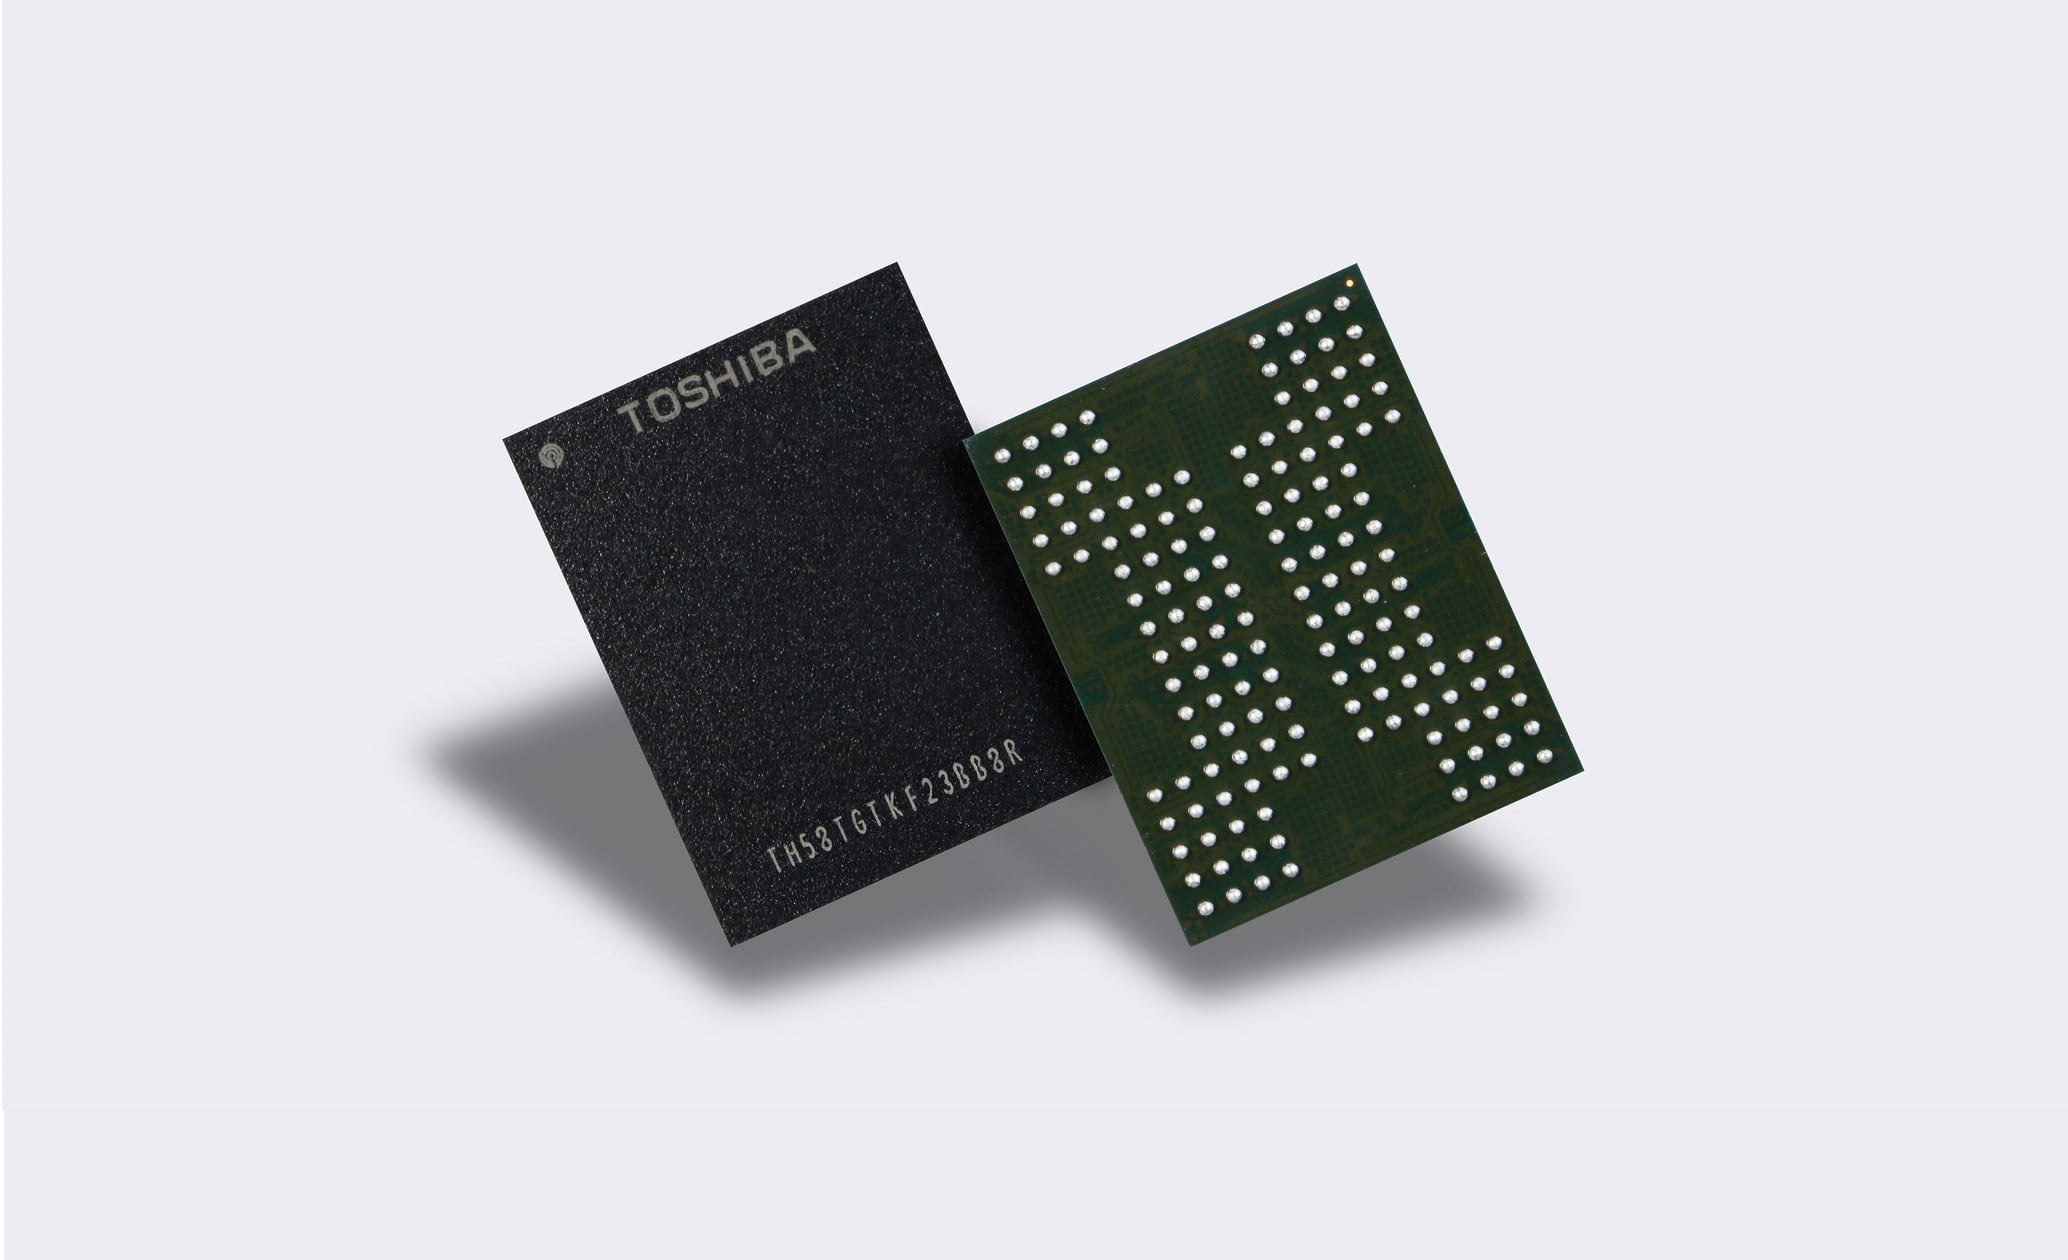 Toshiba First to Unveil QLC NAND Flash Memory Packing 768Gb Per Die, Up to 1.5TB Per Package